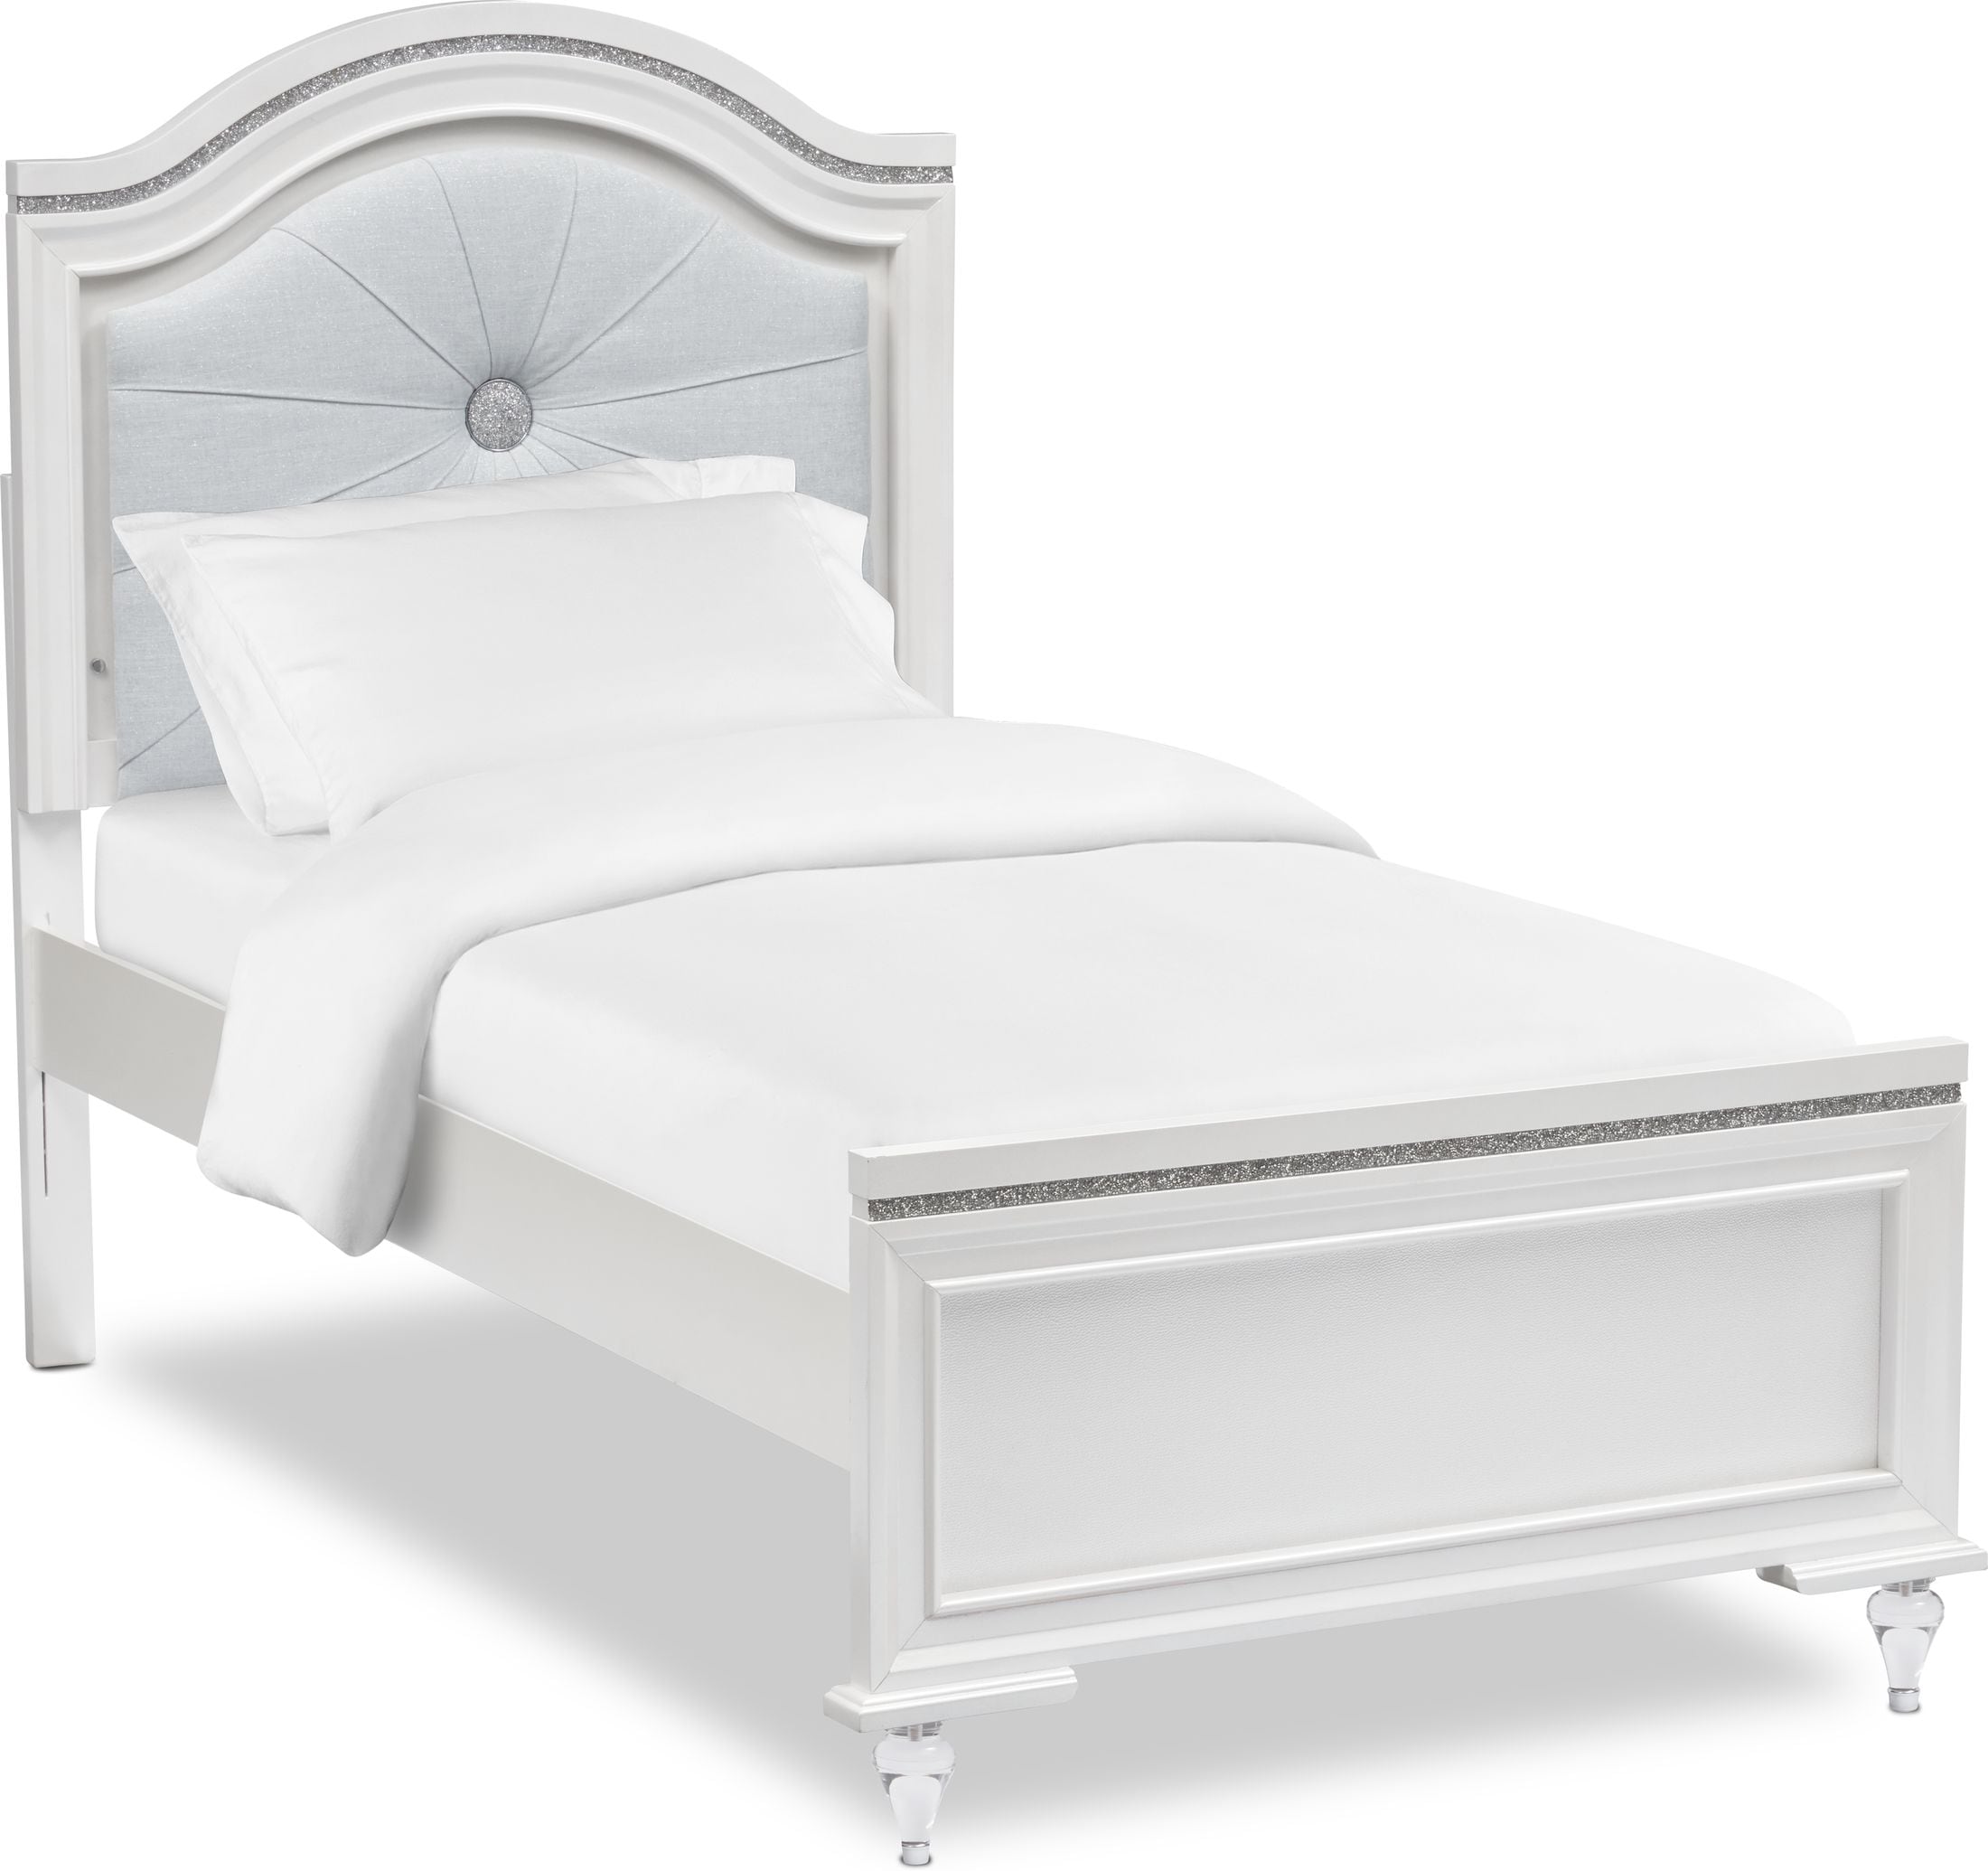 Value City Twin Beds Free Delivery, Value City Twin Beds